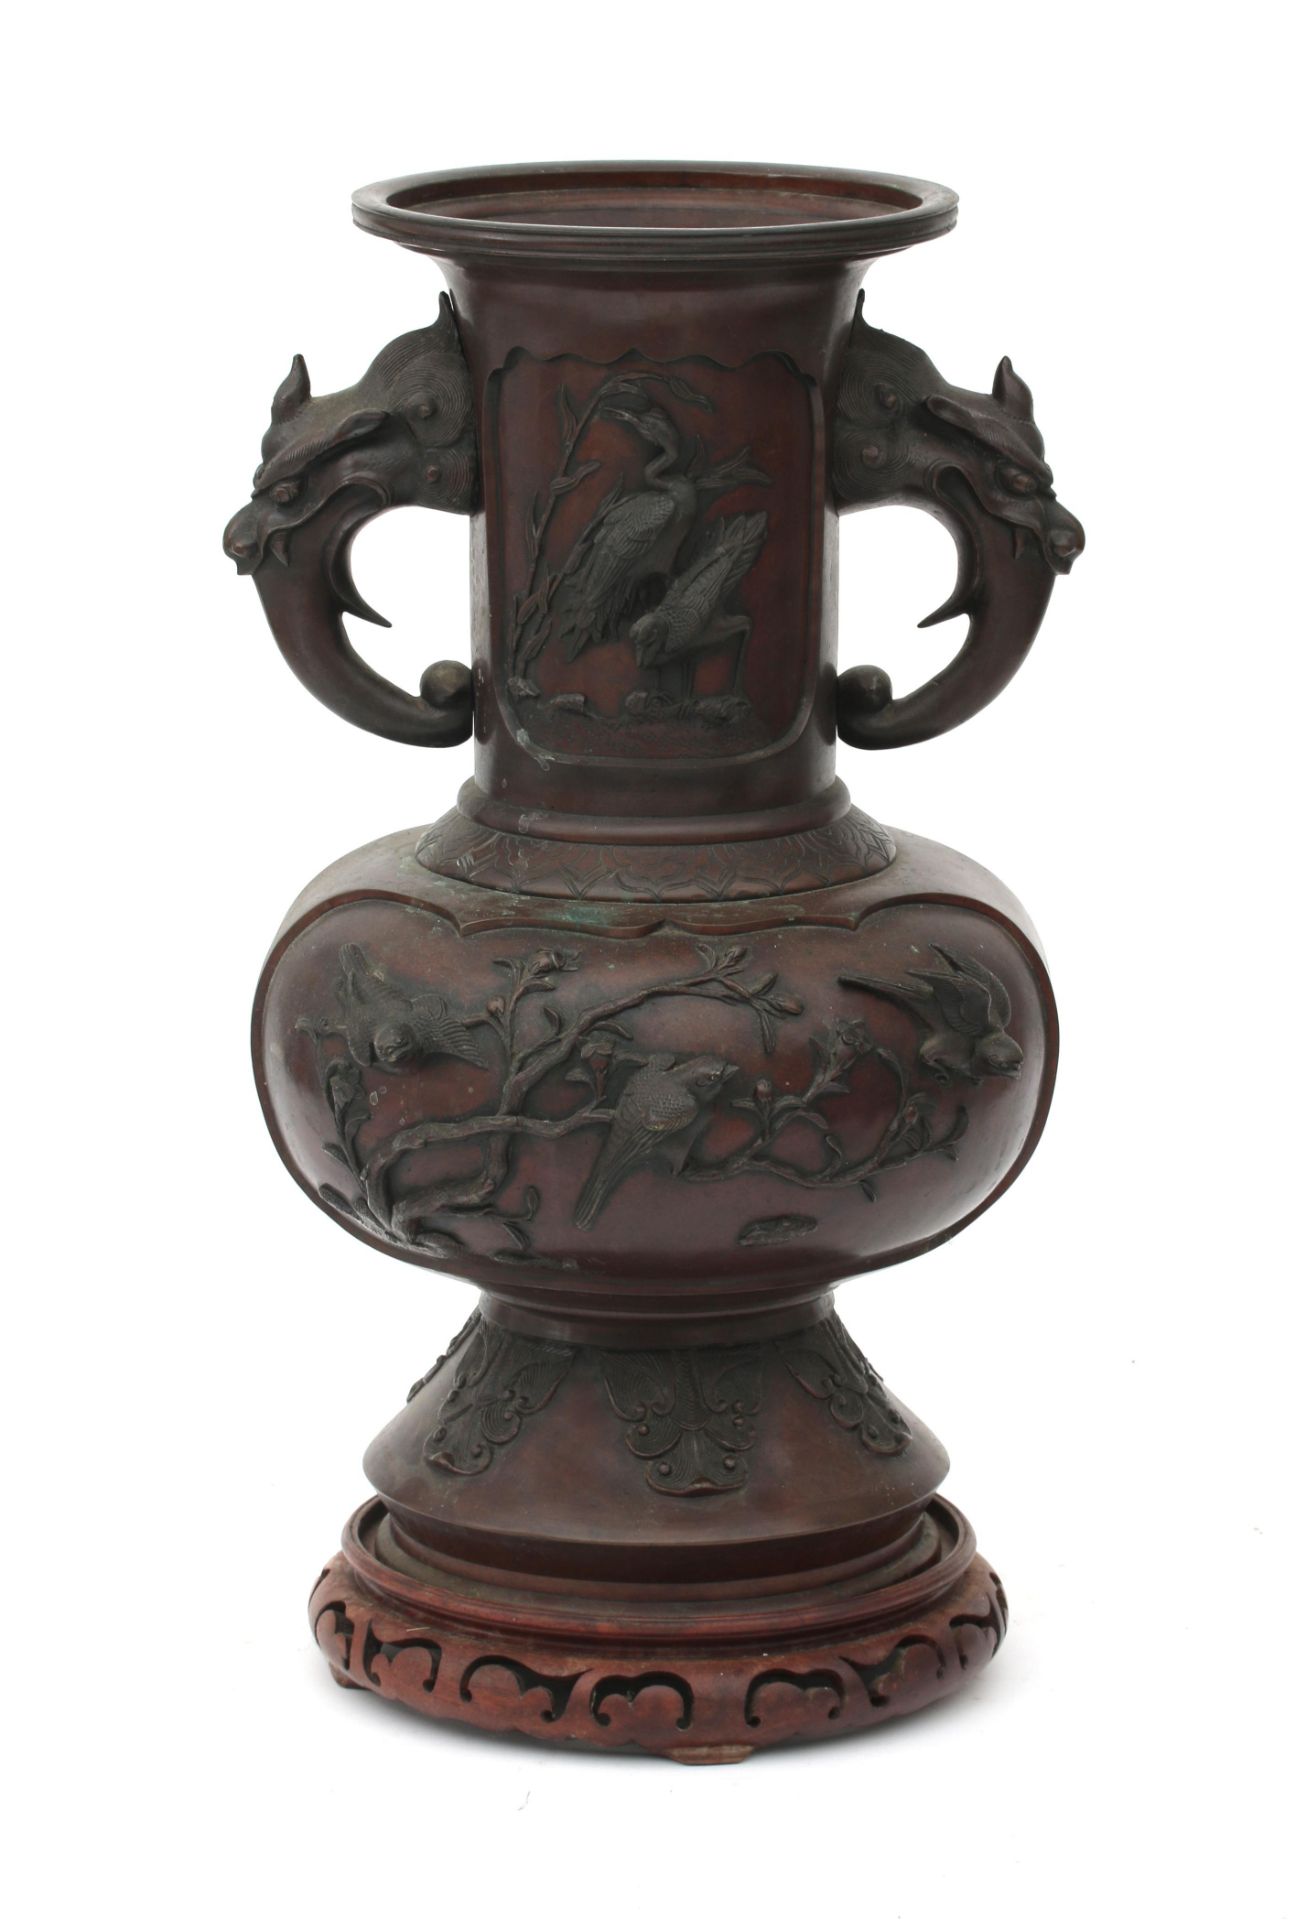 A large Japanese bronze vase with relief decoration of birds, blossoms, bamboo branches and handles